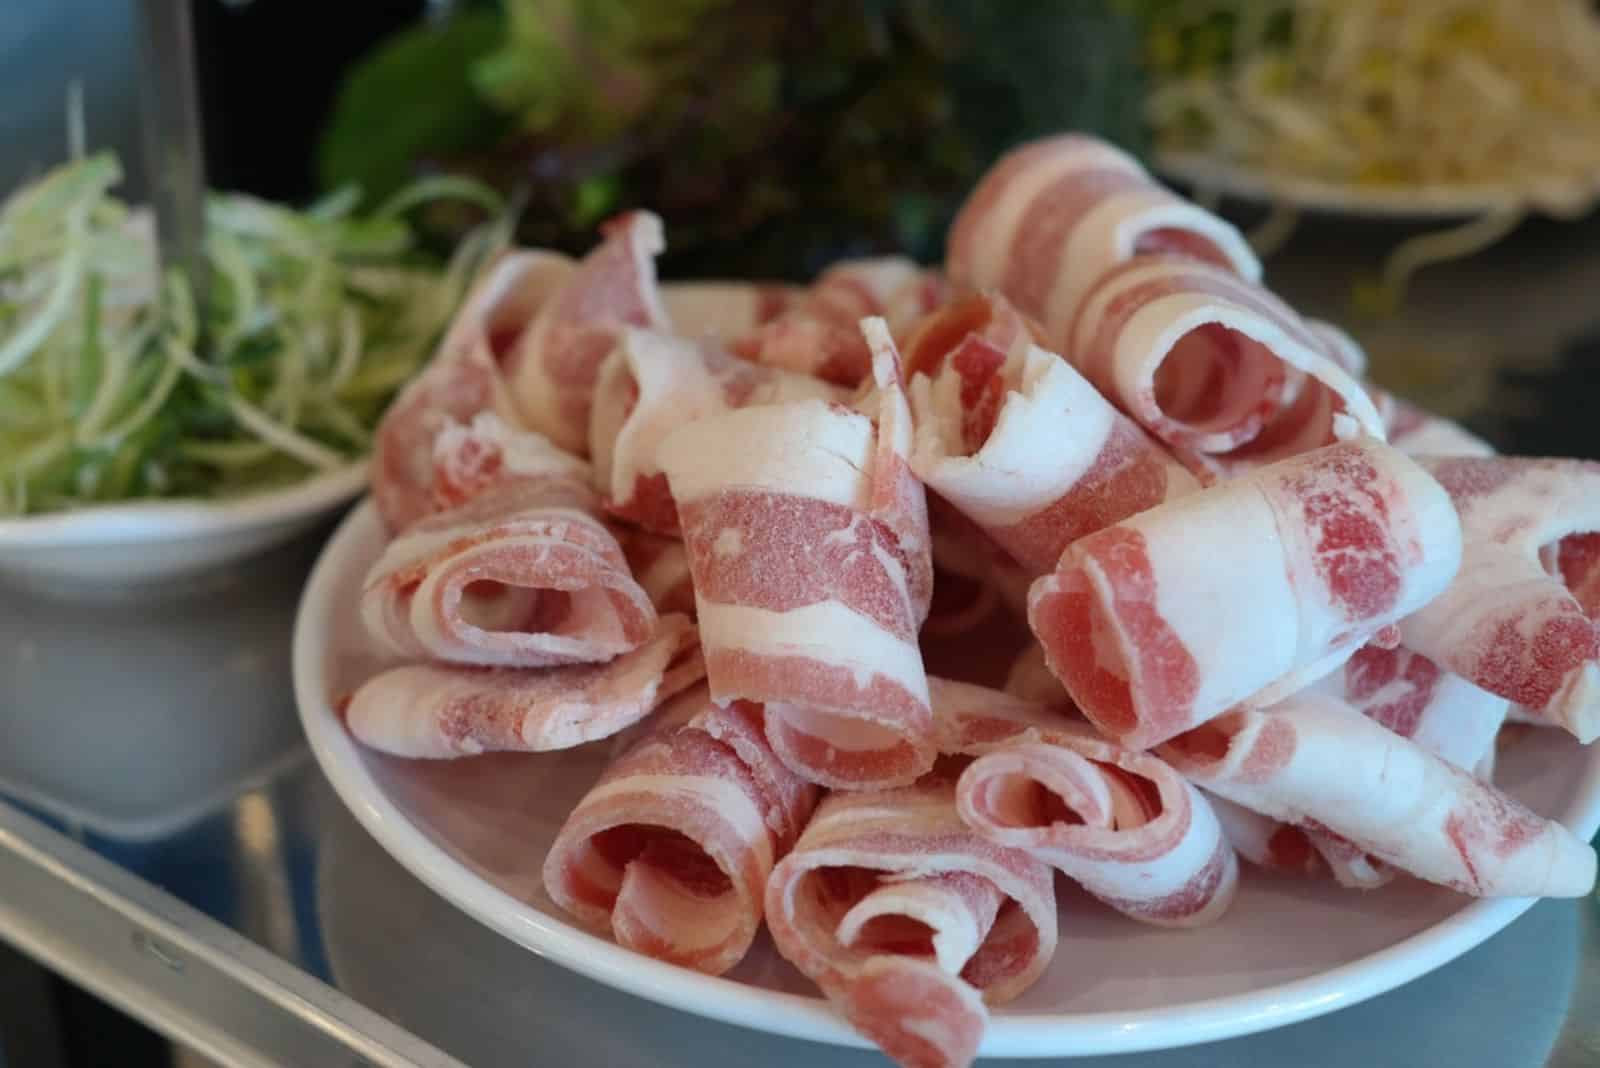 Frozen pork belly prepared by cutting thin and flat